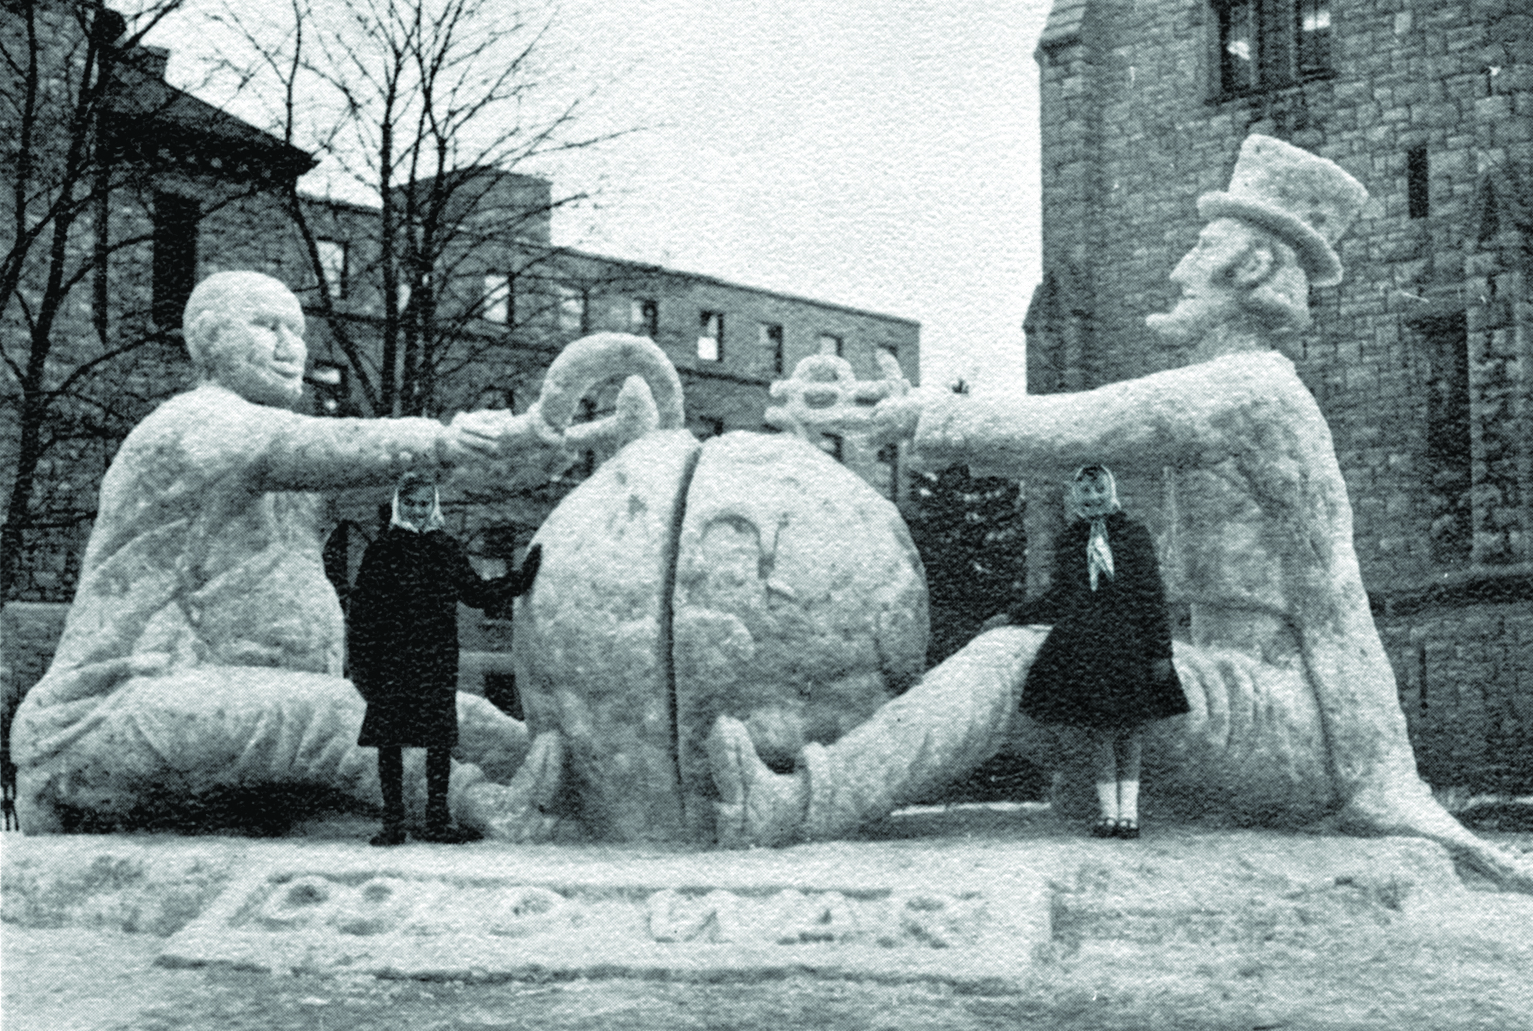 [1961 photo of a campus snow sculpture entitled "Cold War" featuring Uncle Sam and Khrushchev fighting over a globe]